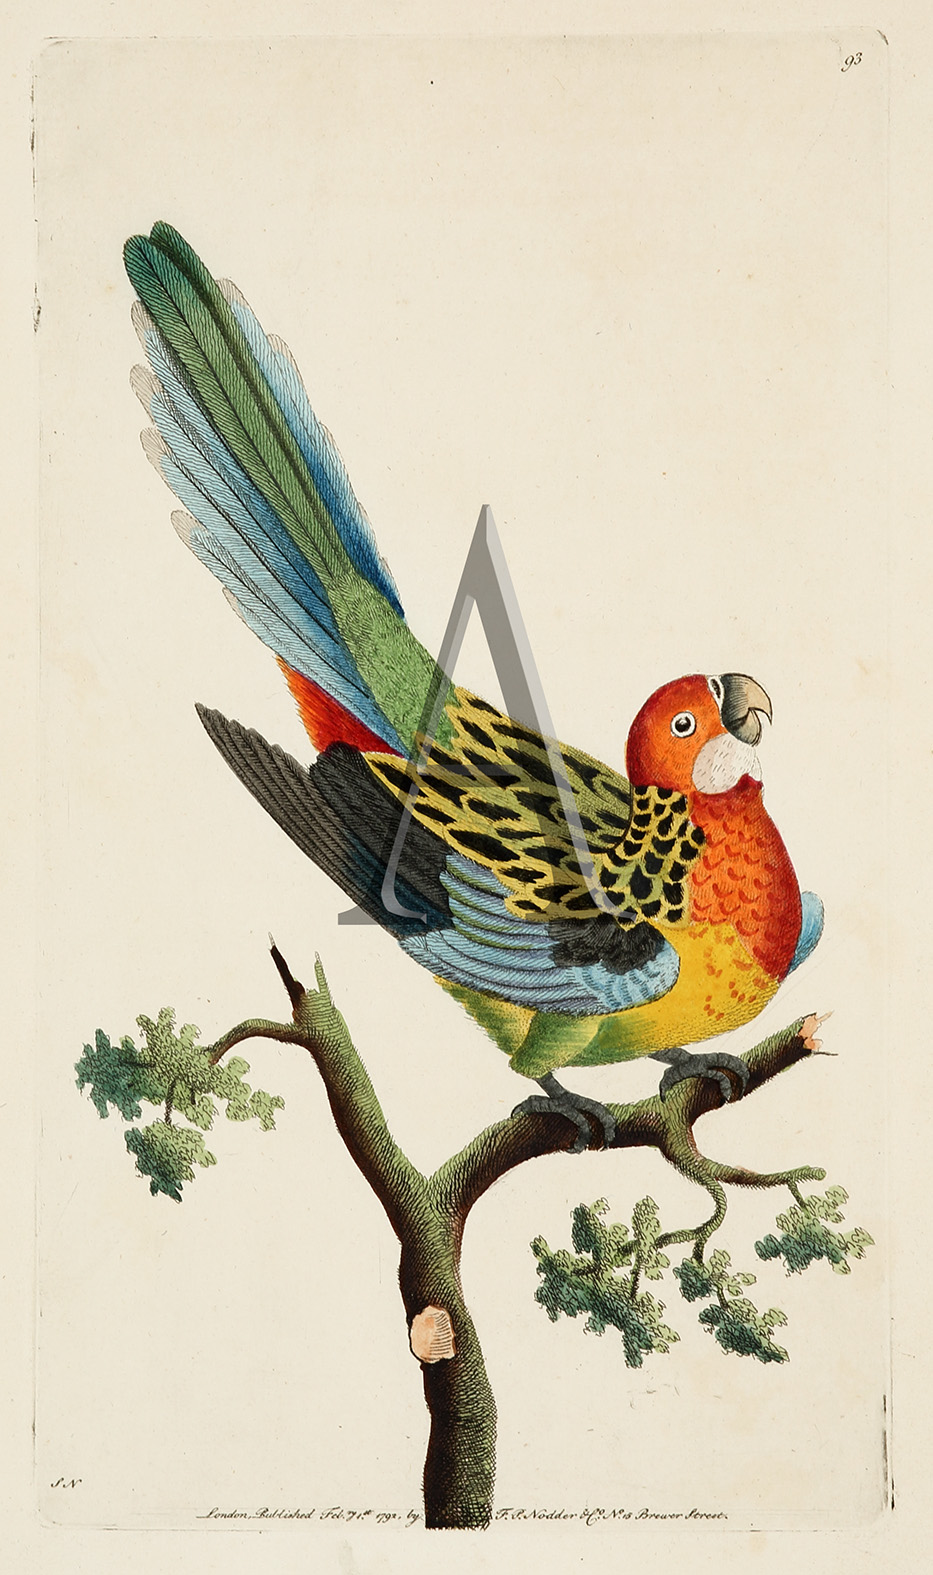 The Nonpareil Parrot. - Antique Print from 1792